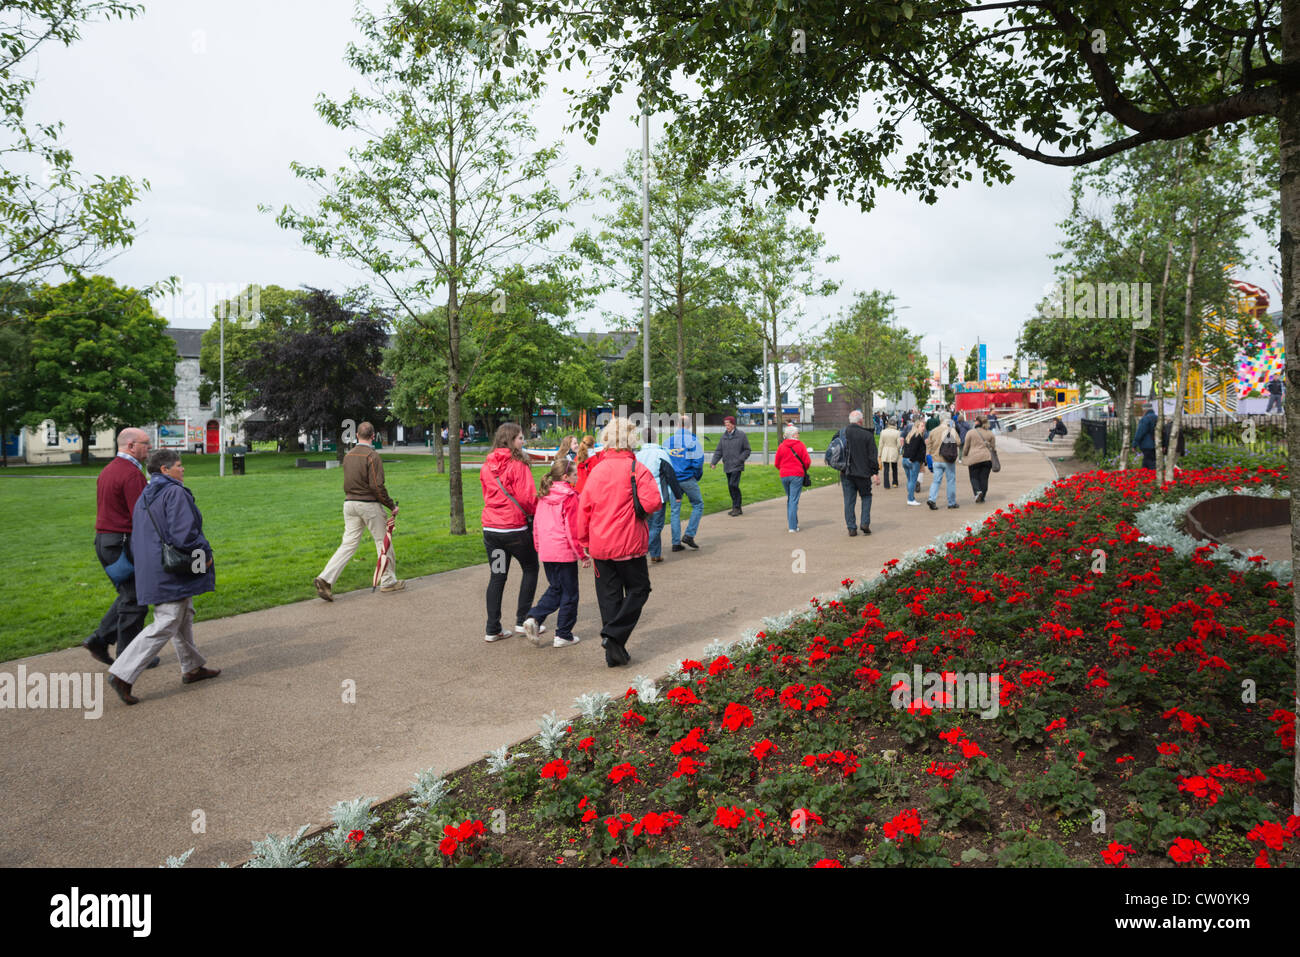 Flower beds at Eyre Square Galway City, Ireland. Stock Photo